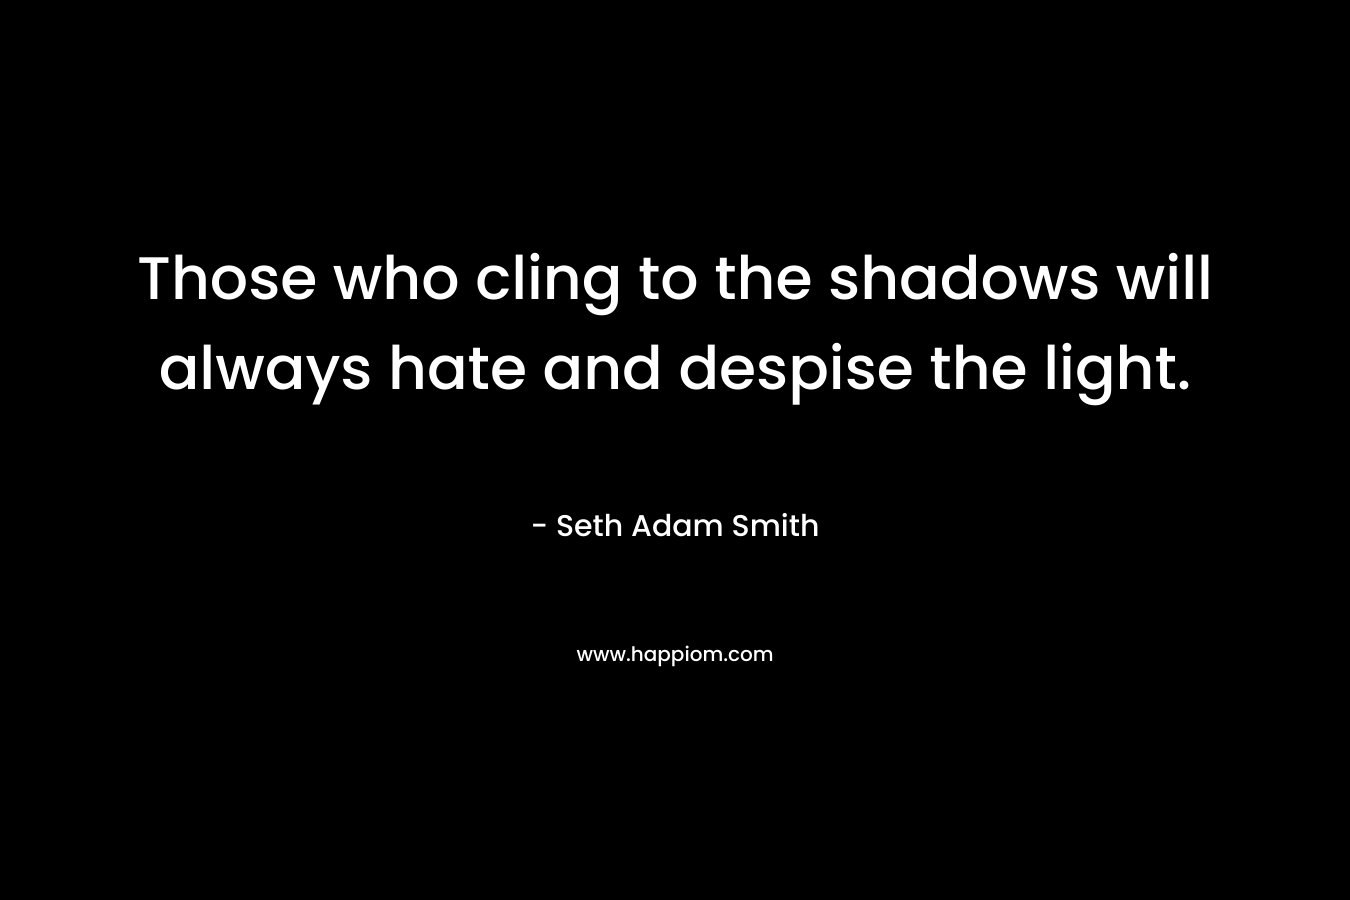 Those who cling to the shadows will always hate and despise the light.